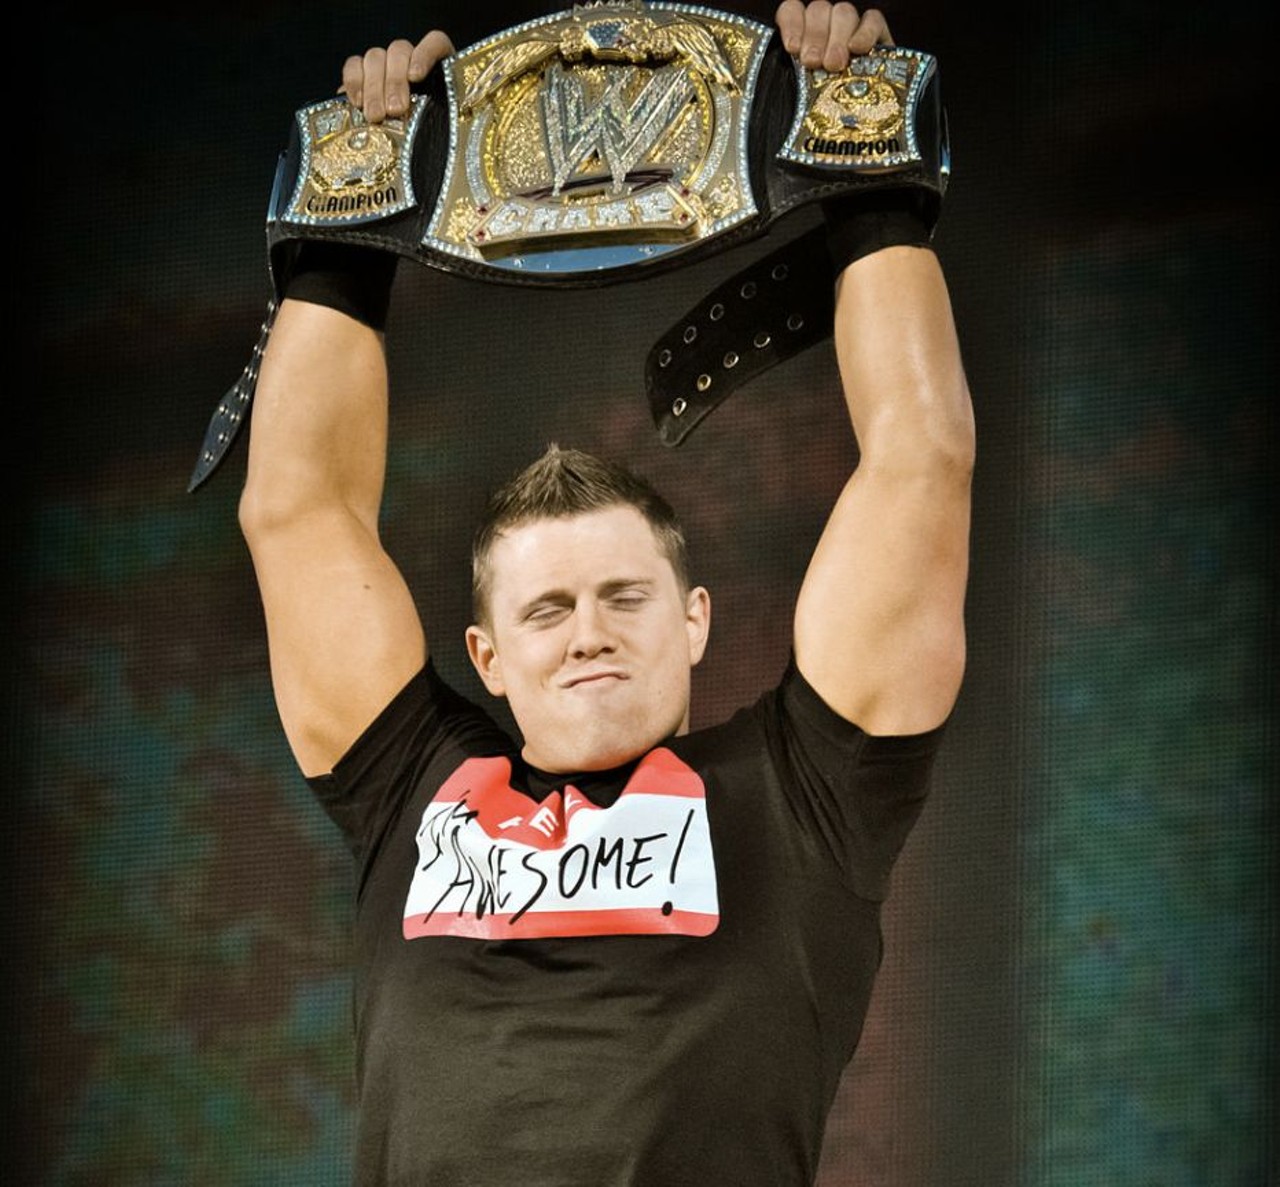  The Miz
Michael Mizanin, a Parma native, first gained fame by appearing on MTV&#146;s The Real World in 2001 and followed it up by appearances on spin-offs like The Gauntlet and Real World/Road Rules Challenge. Mizanin, who attended Normandy High School, turned that fame into becoming one of the biggest WWE stars. Known as The Miz, he has held the WWE Championship and Intercontinental Championship belts.
Photo via Wikimedia/Shamsuddin Muhammad